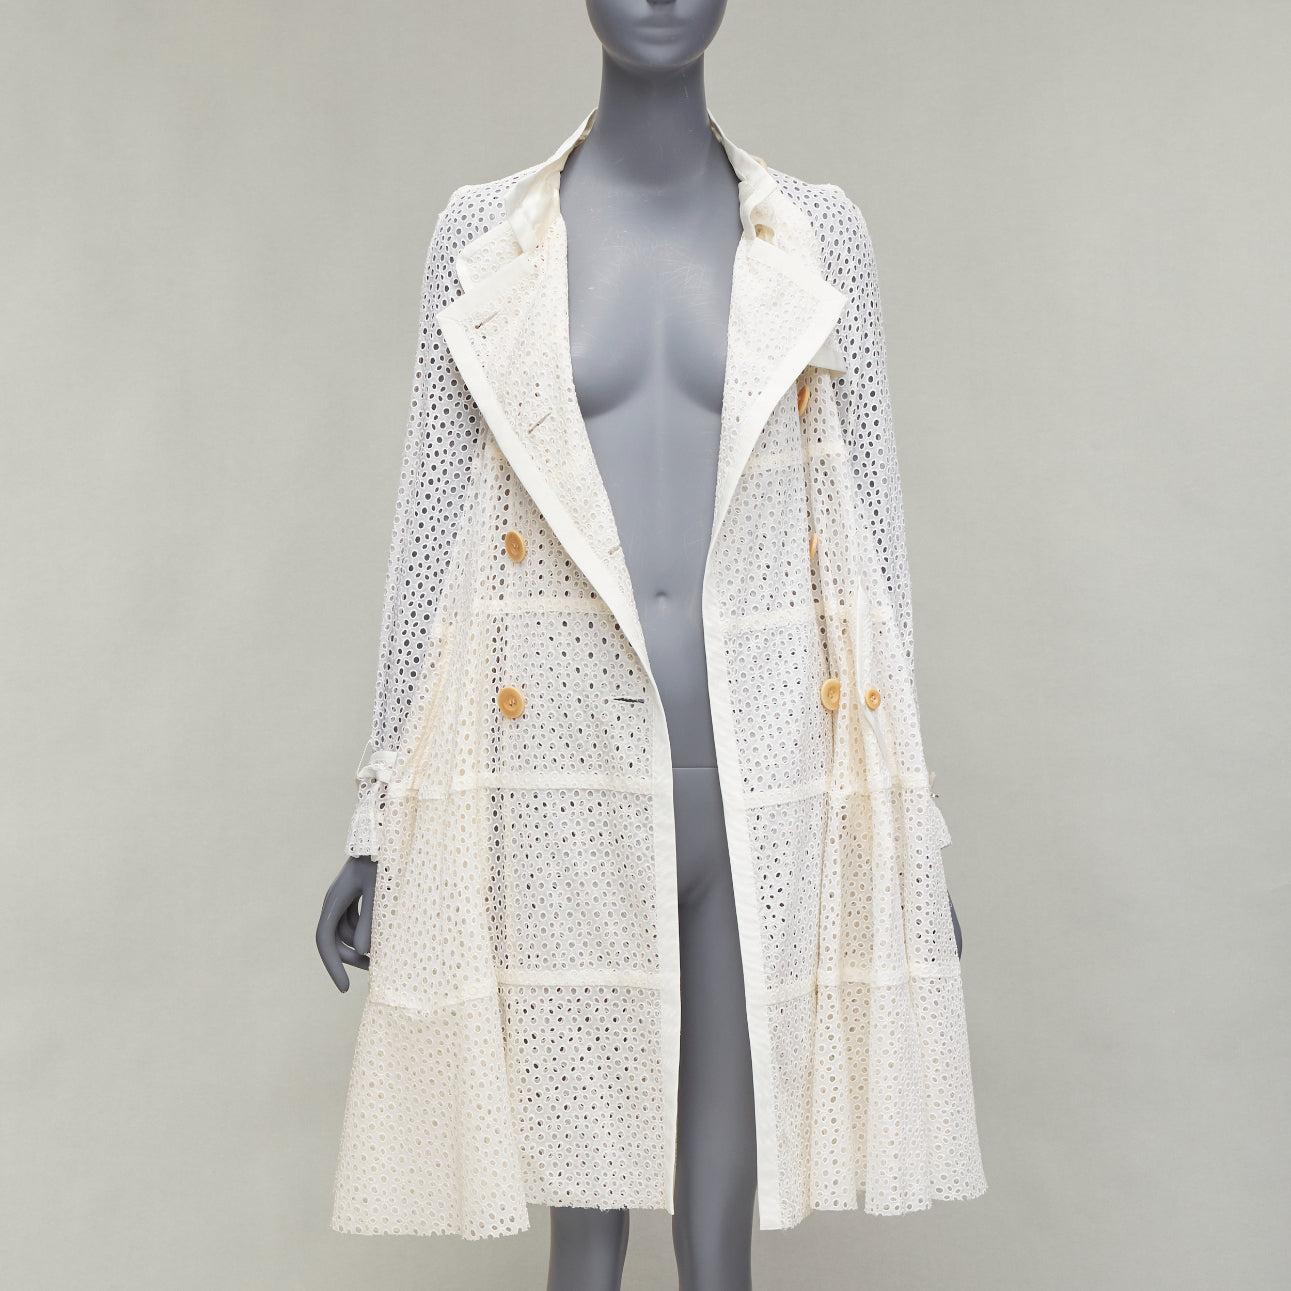 SACAI 2012 cream eyelet embroidery anglais double breast belted flared coat JP3 L
Reference: DYTG/A00014
Brand: Sacai
Designer: Chitose Abe
Collection: 2012
Material: Cupro
Color: Cream
Pattern: Lace
Closure: Belt
Extra Details: Tiered panels